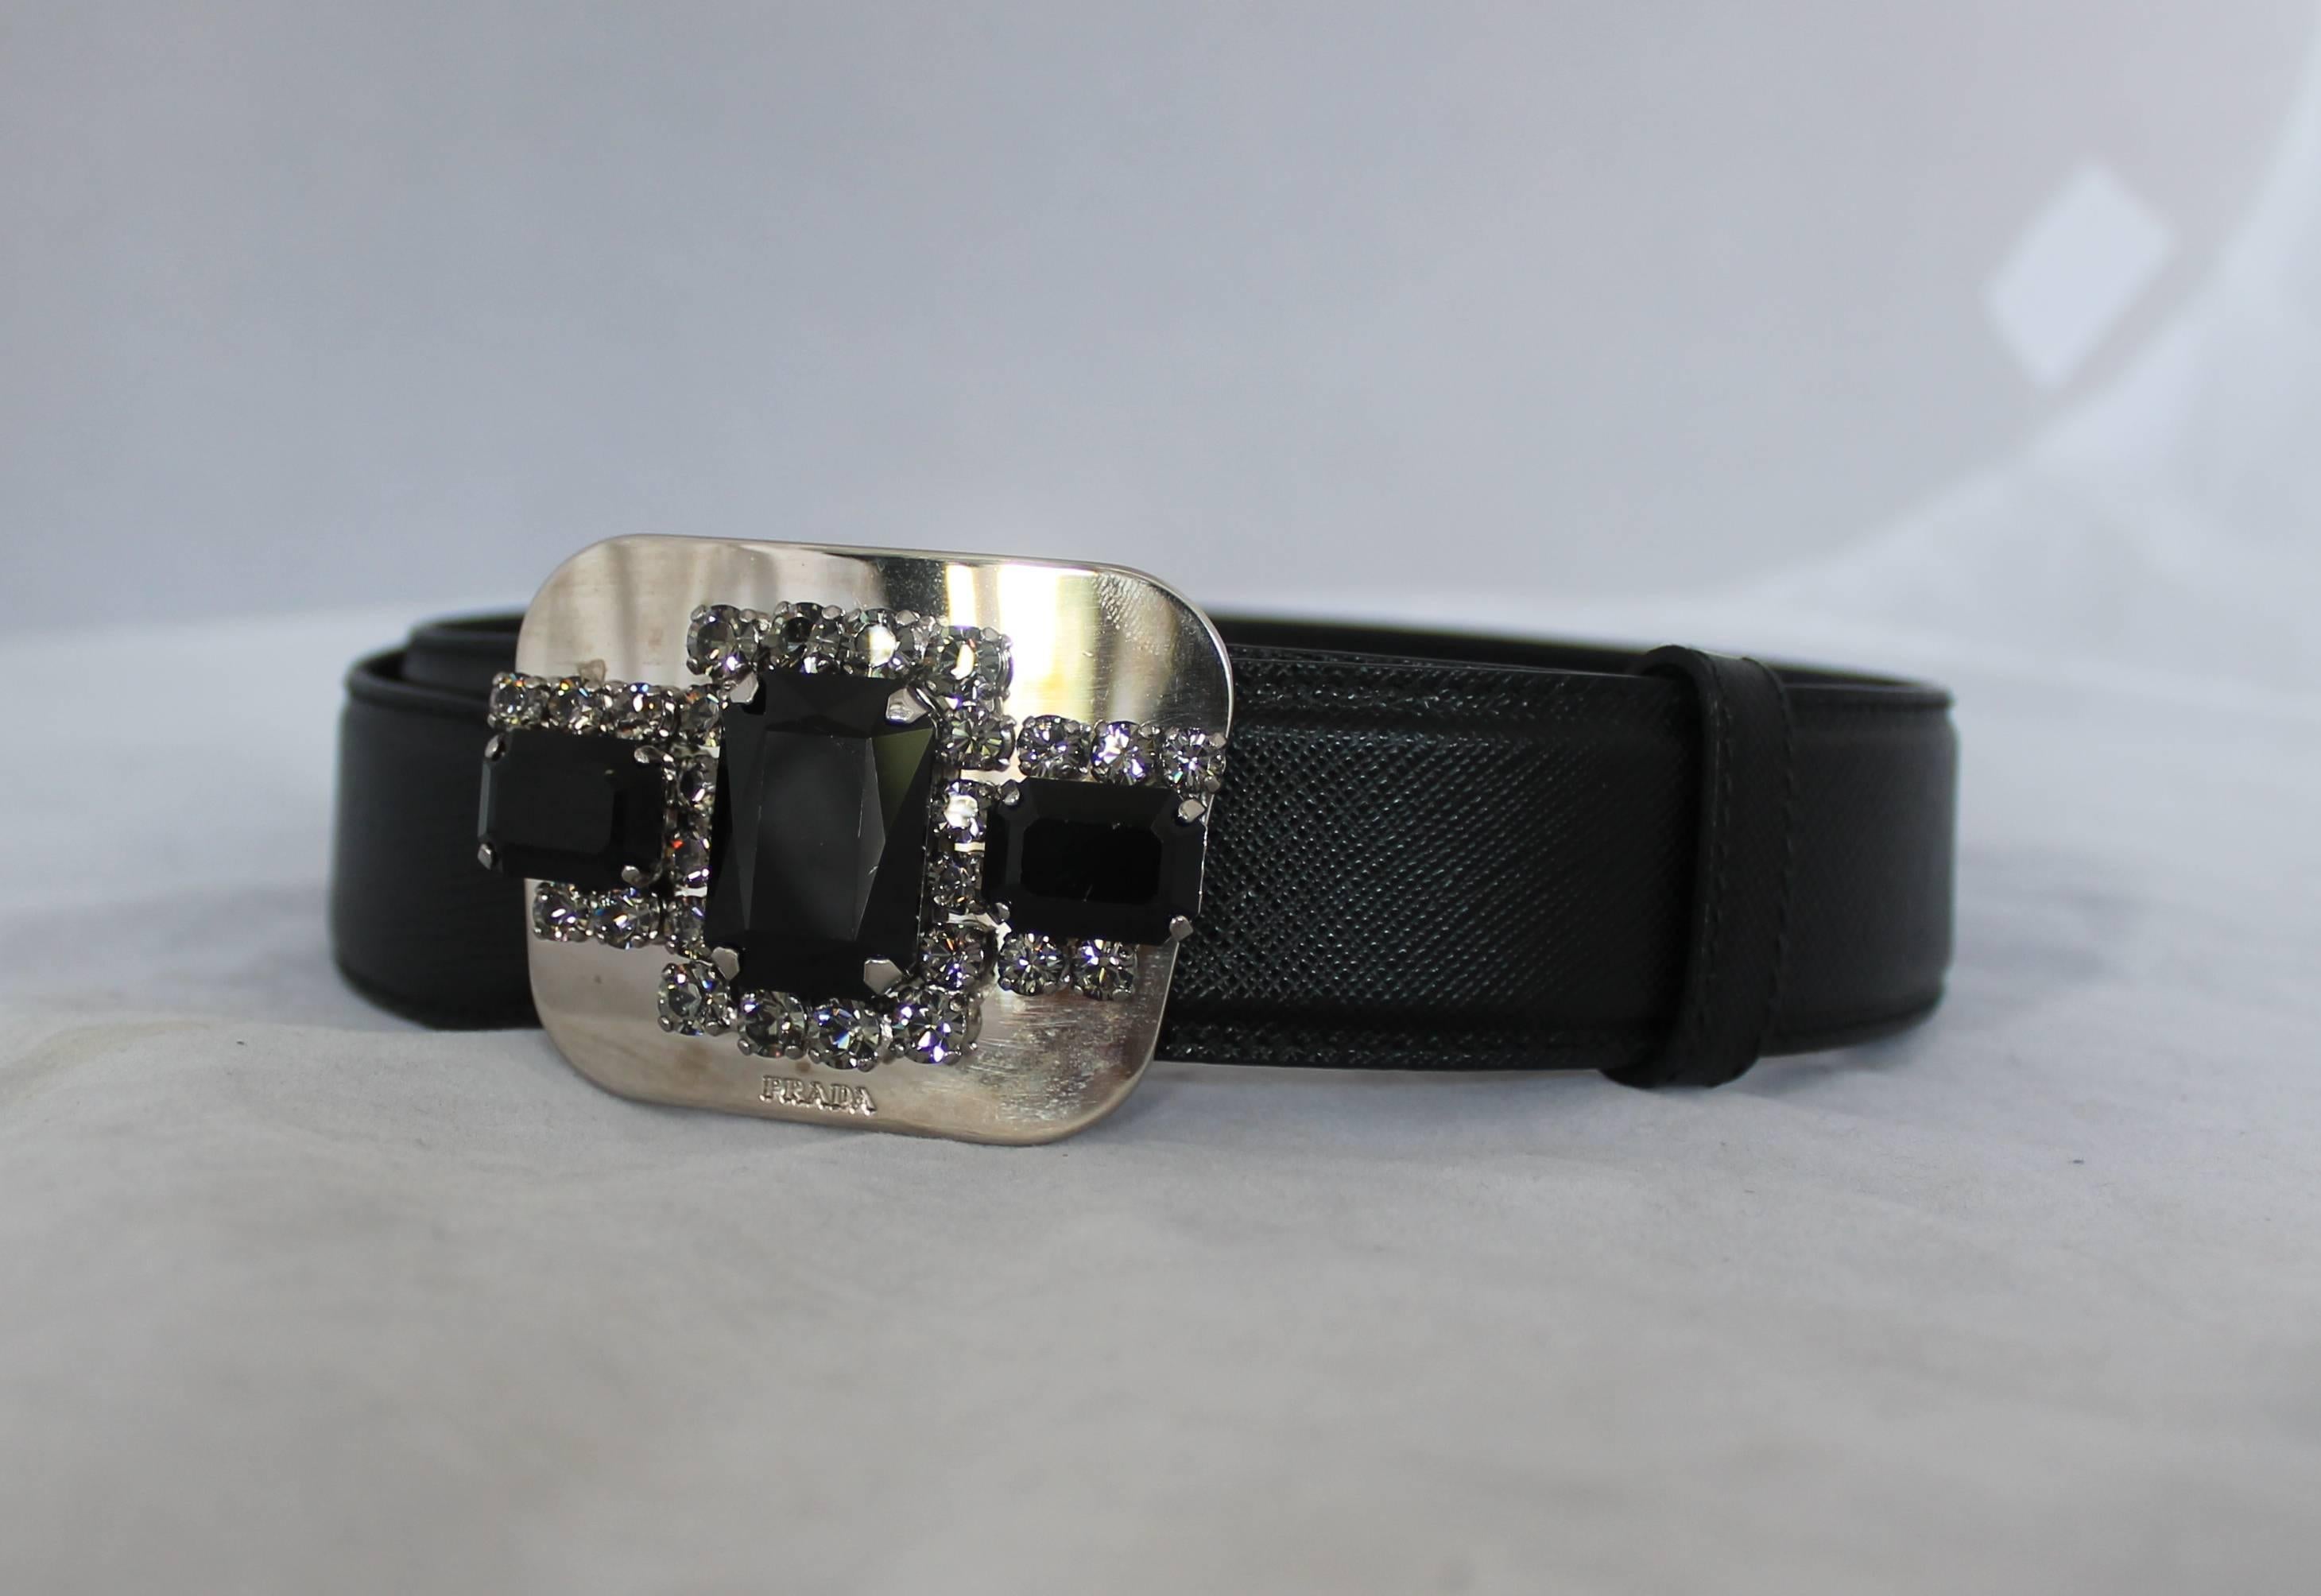 Prada Black Saffiano Belt w/ Silver Rhinestone Buckle - 6
This belt is in very good condition. The buckle is designed with 3 large black rhinestones surrounded with smaller grey rhinestones. However, there is a very minor scratch on center large